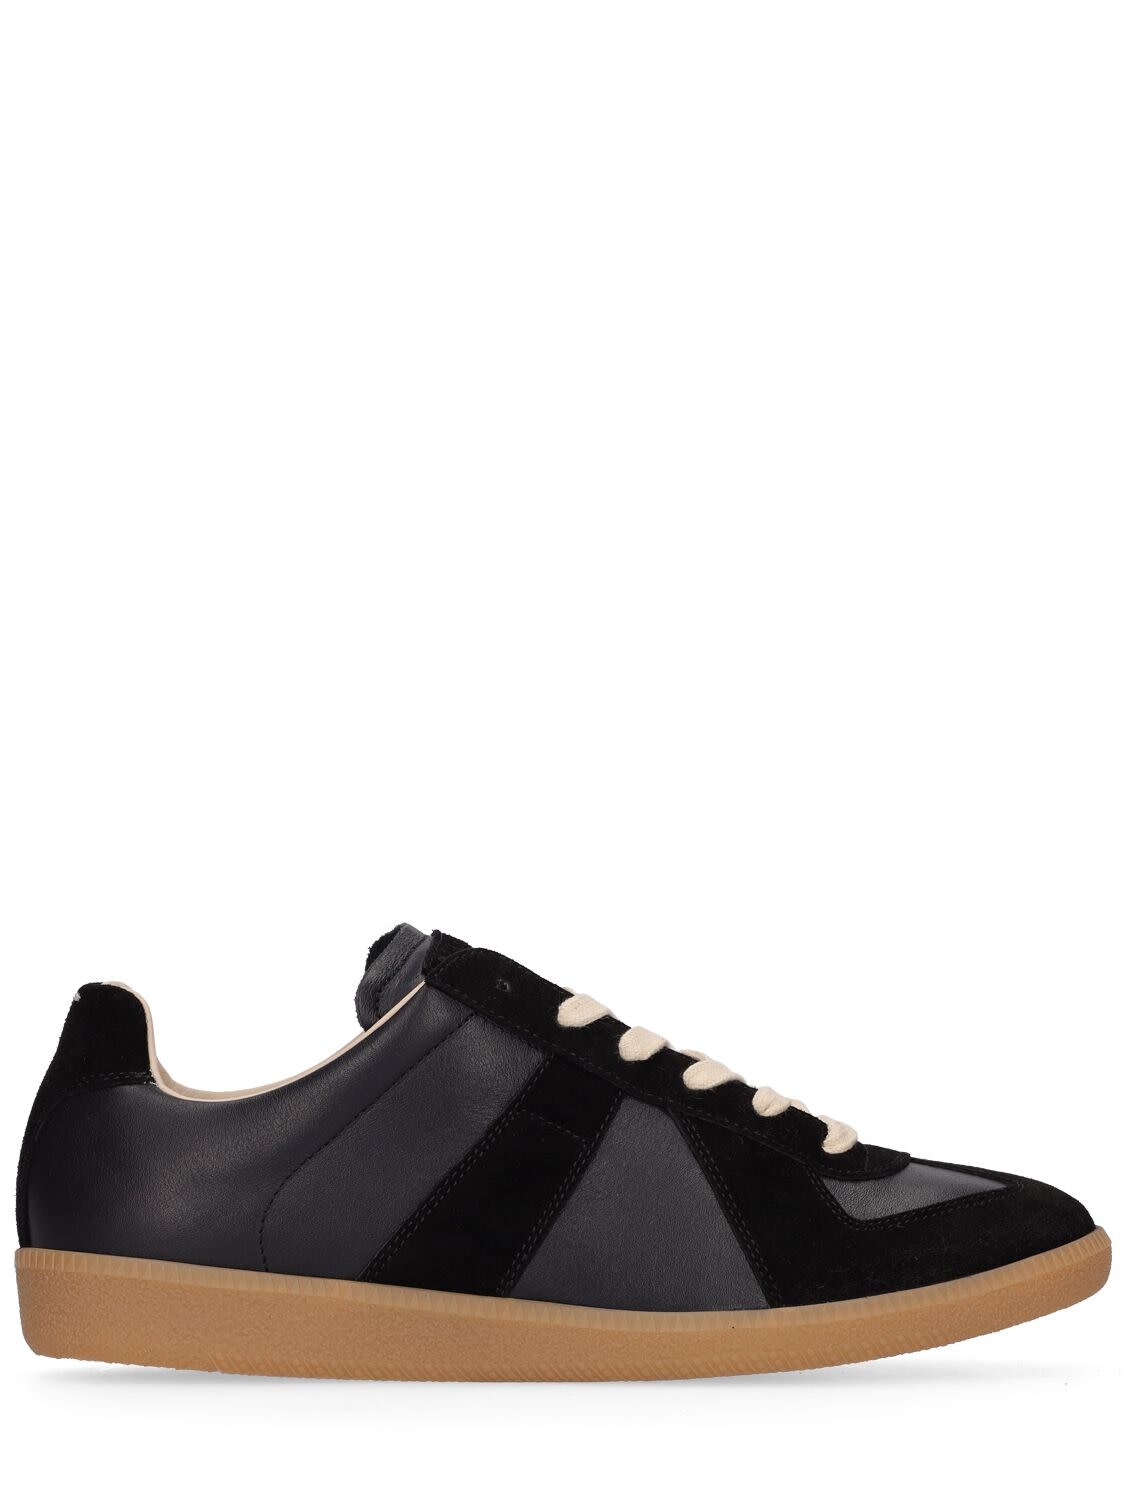 Maison Margiela Replica Leather & Suede Low Top Sneakers In Black